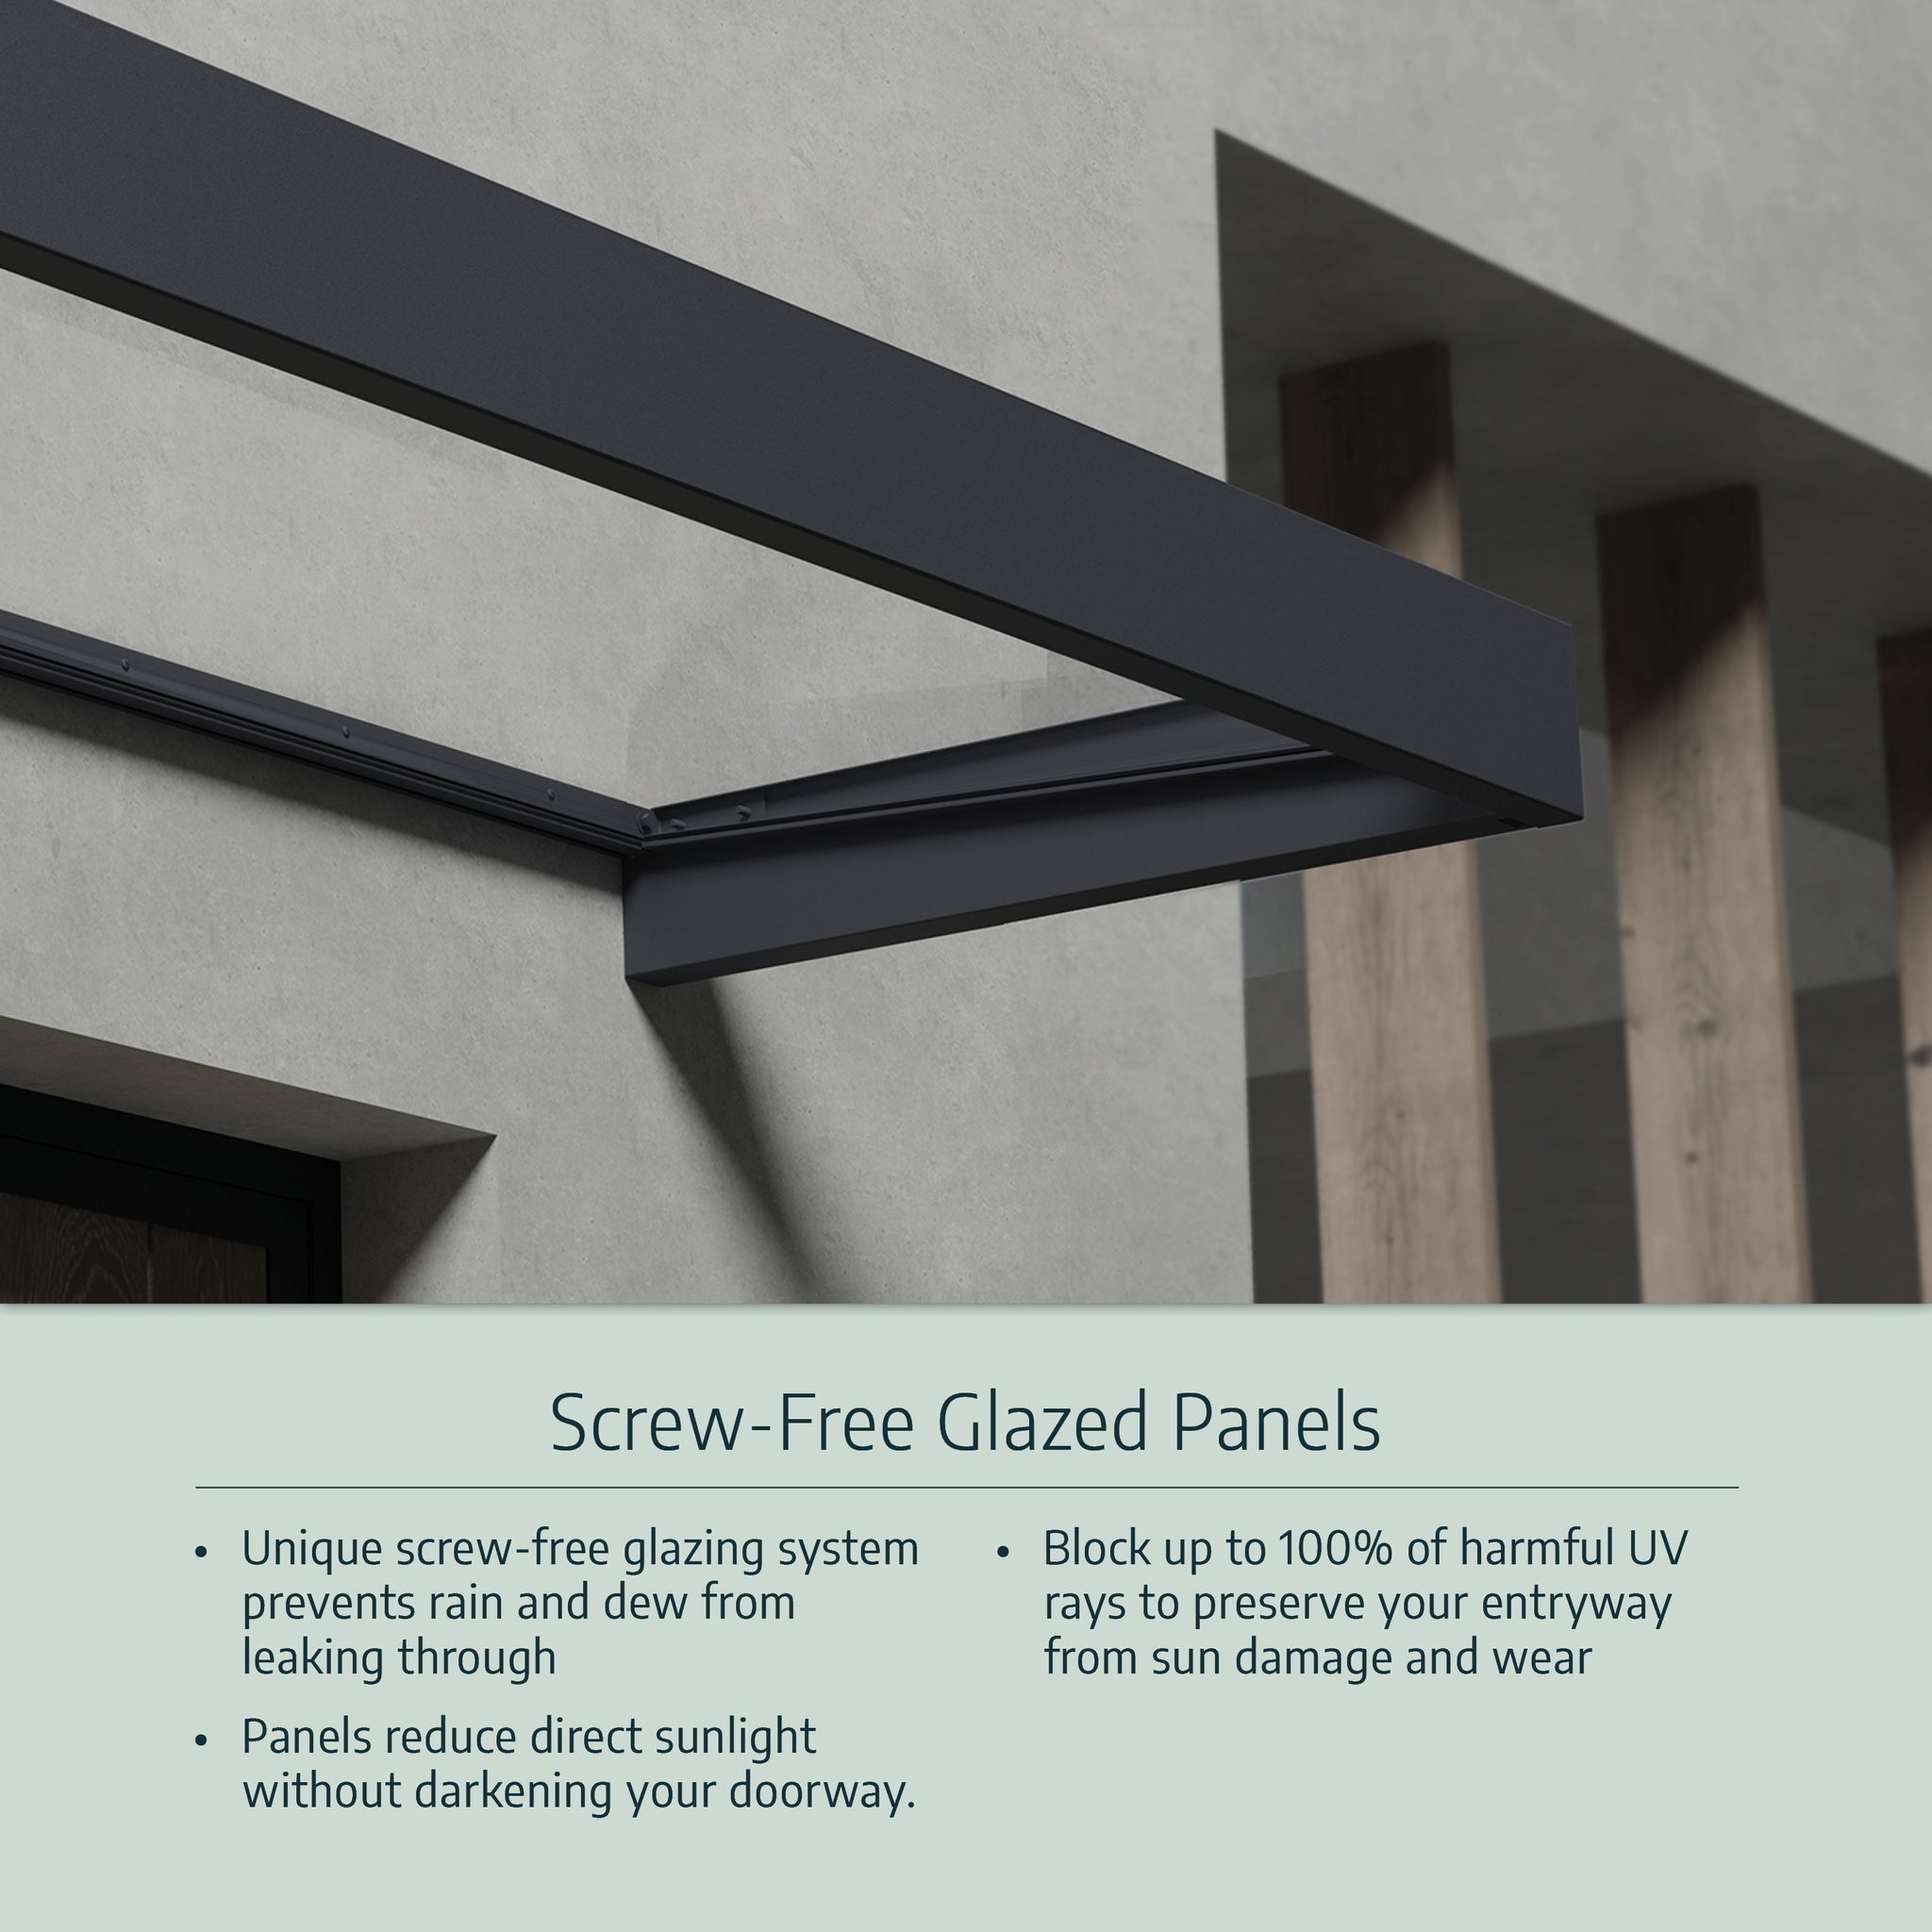 Palram's Door Awnings Competitive Advantages